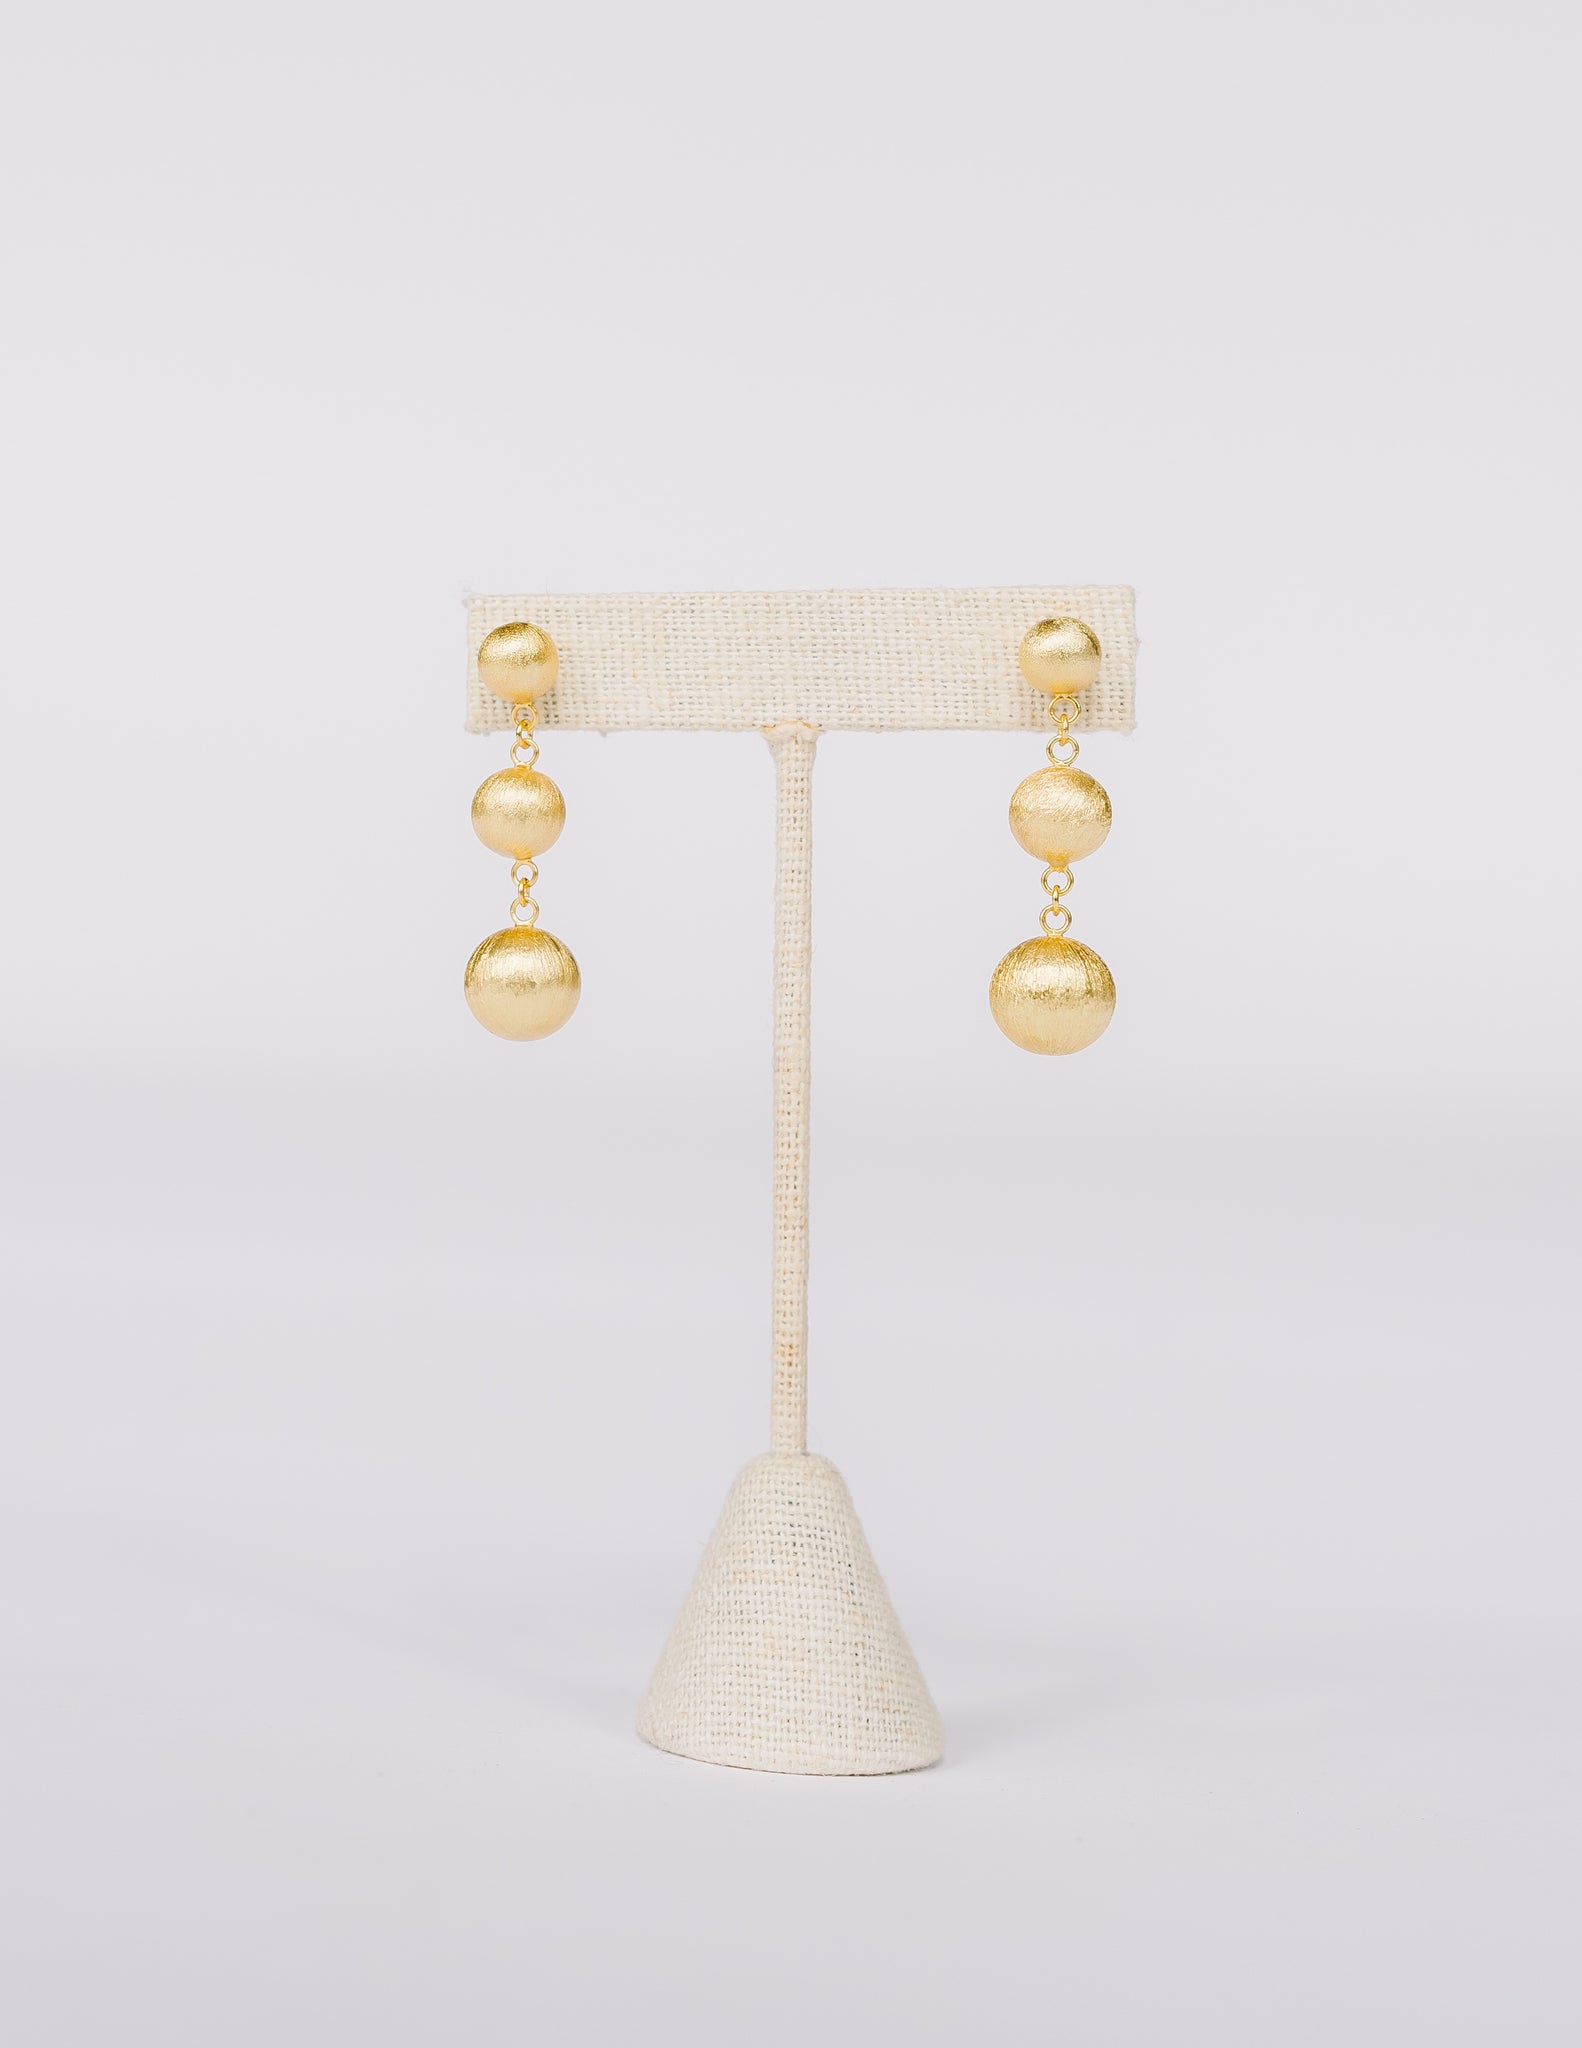 Betty Carre Earrings in Brushed Gold